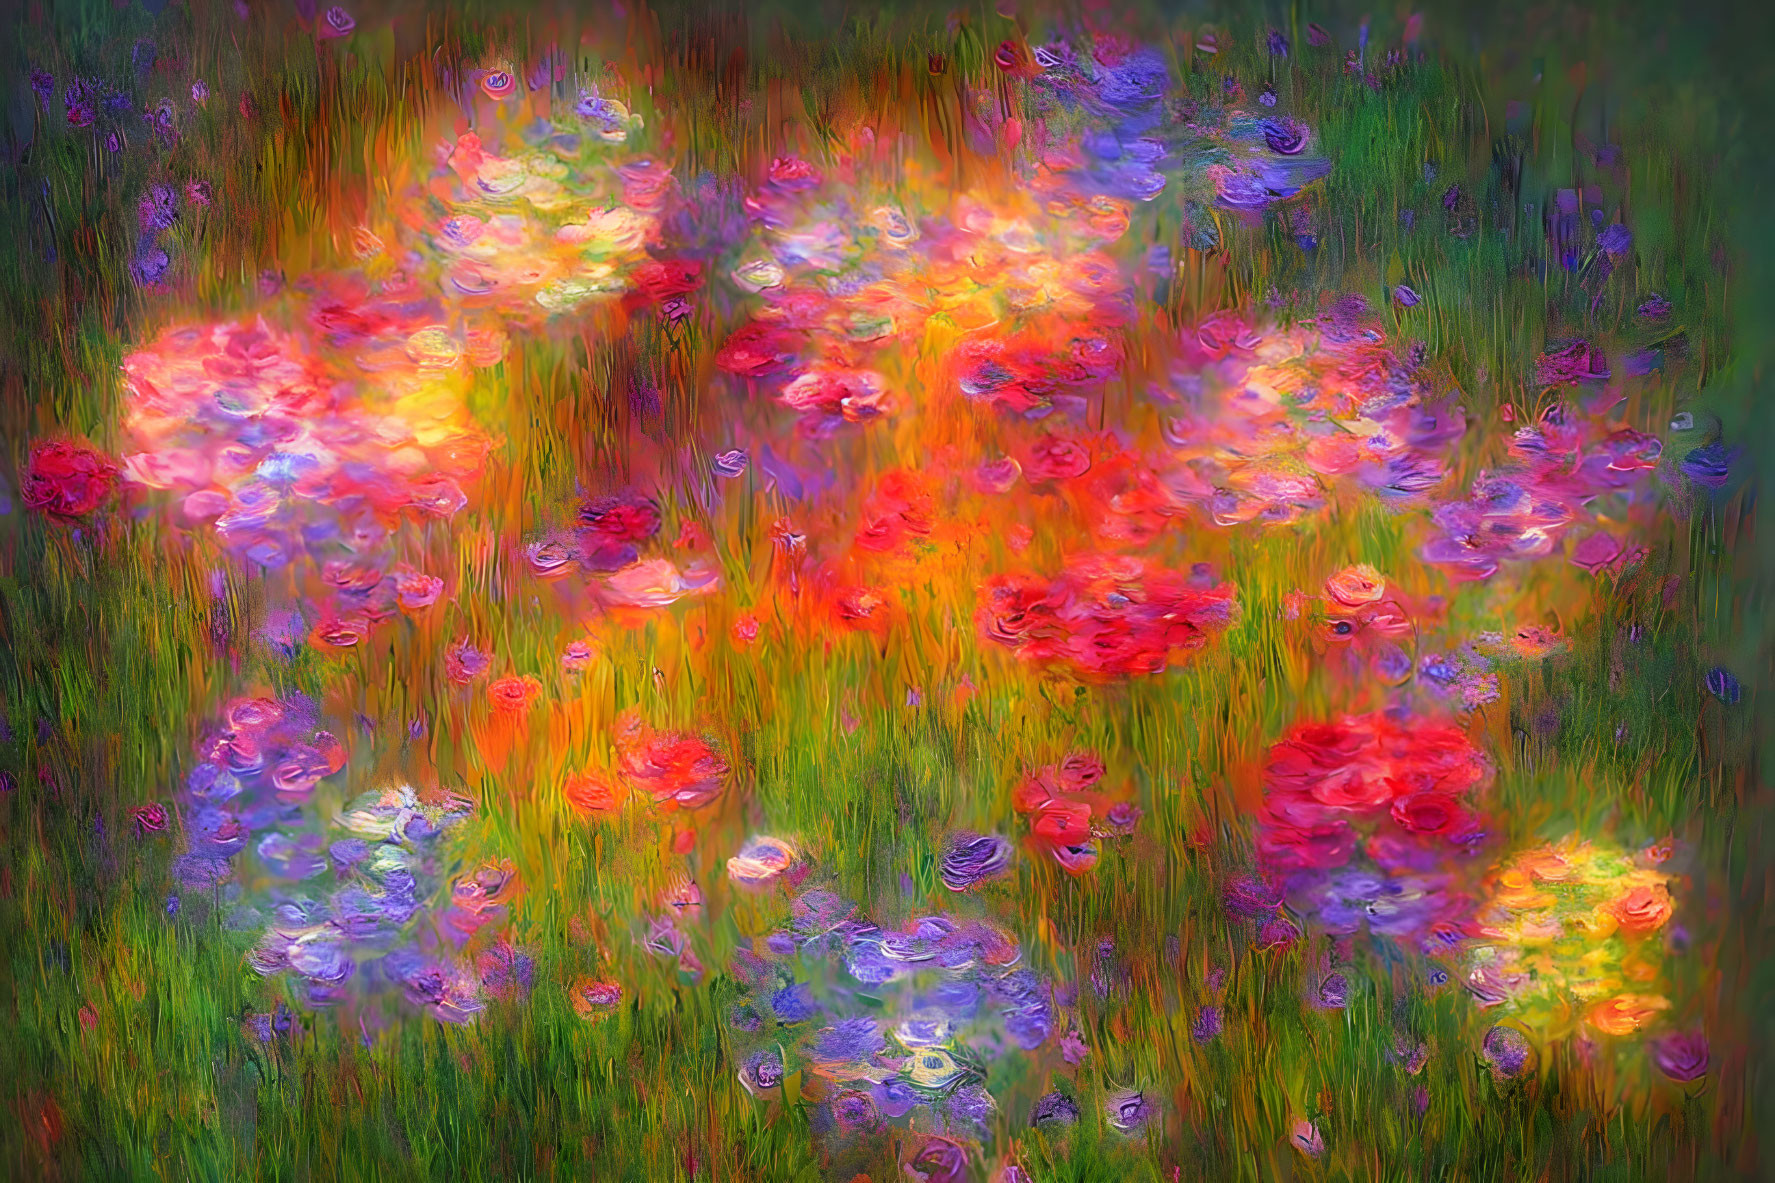 Flowers in the style of Claude Monet